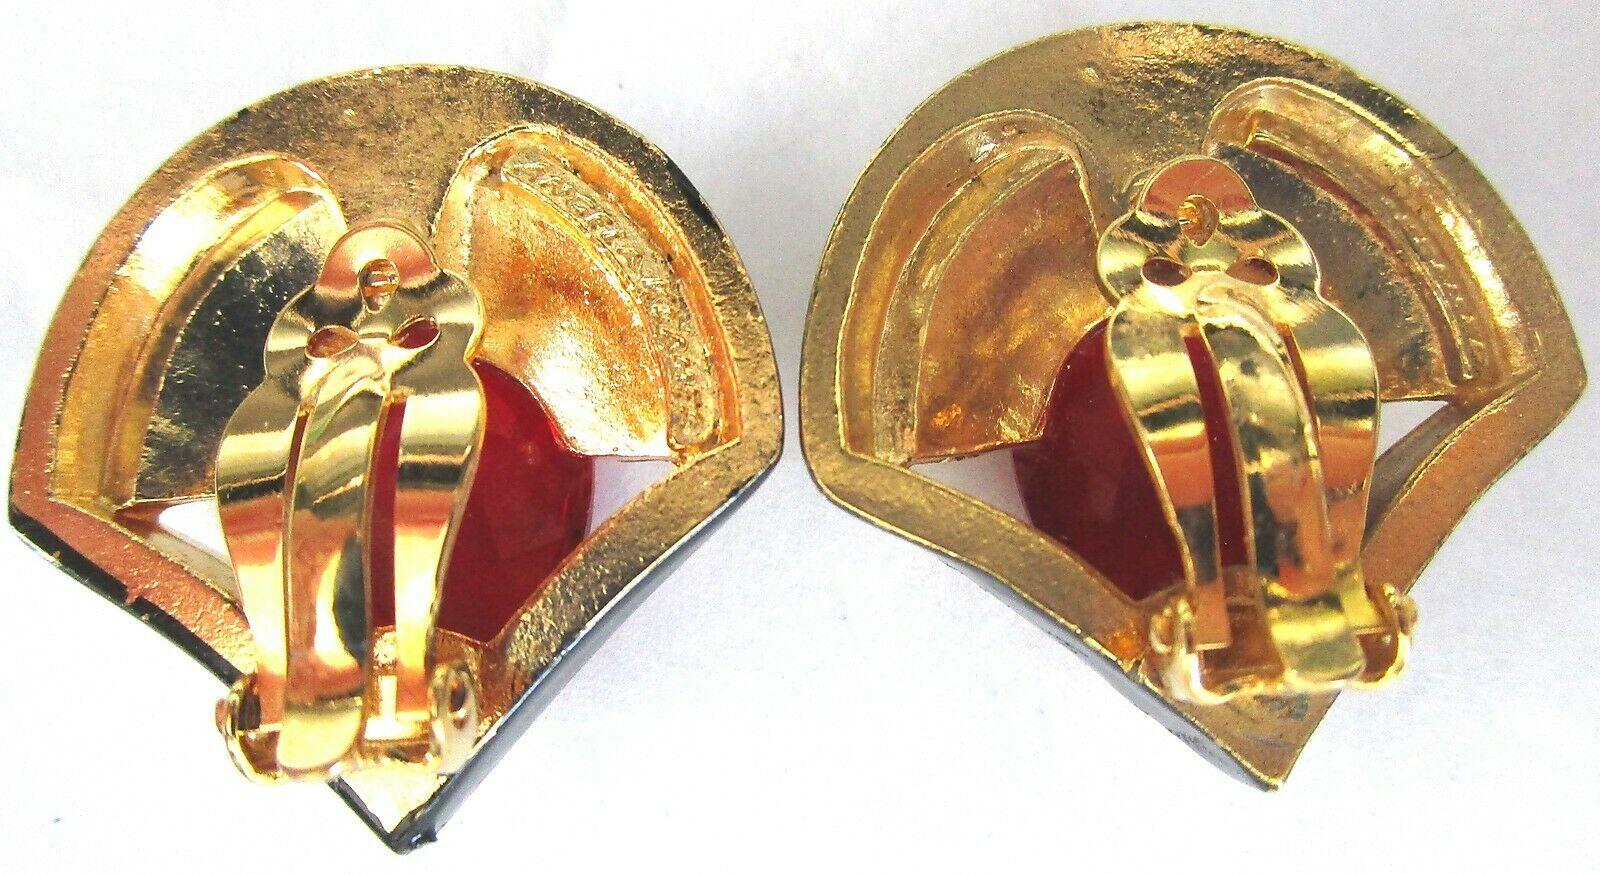 Beautiful Modernist design Clip-on Earrings. Each set with Yellow Baguettes and Red Teardrop CZs, enhanced with Black Enamel surround. Gold plate mounting. Measuring approx. 1.25